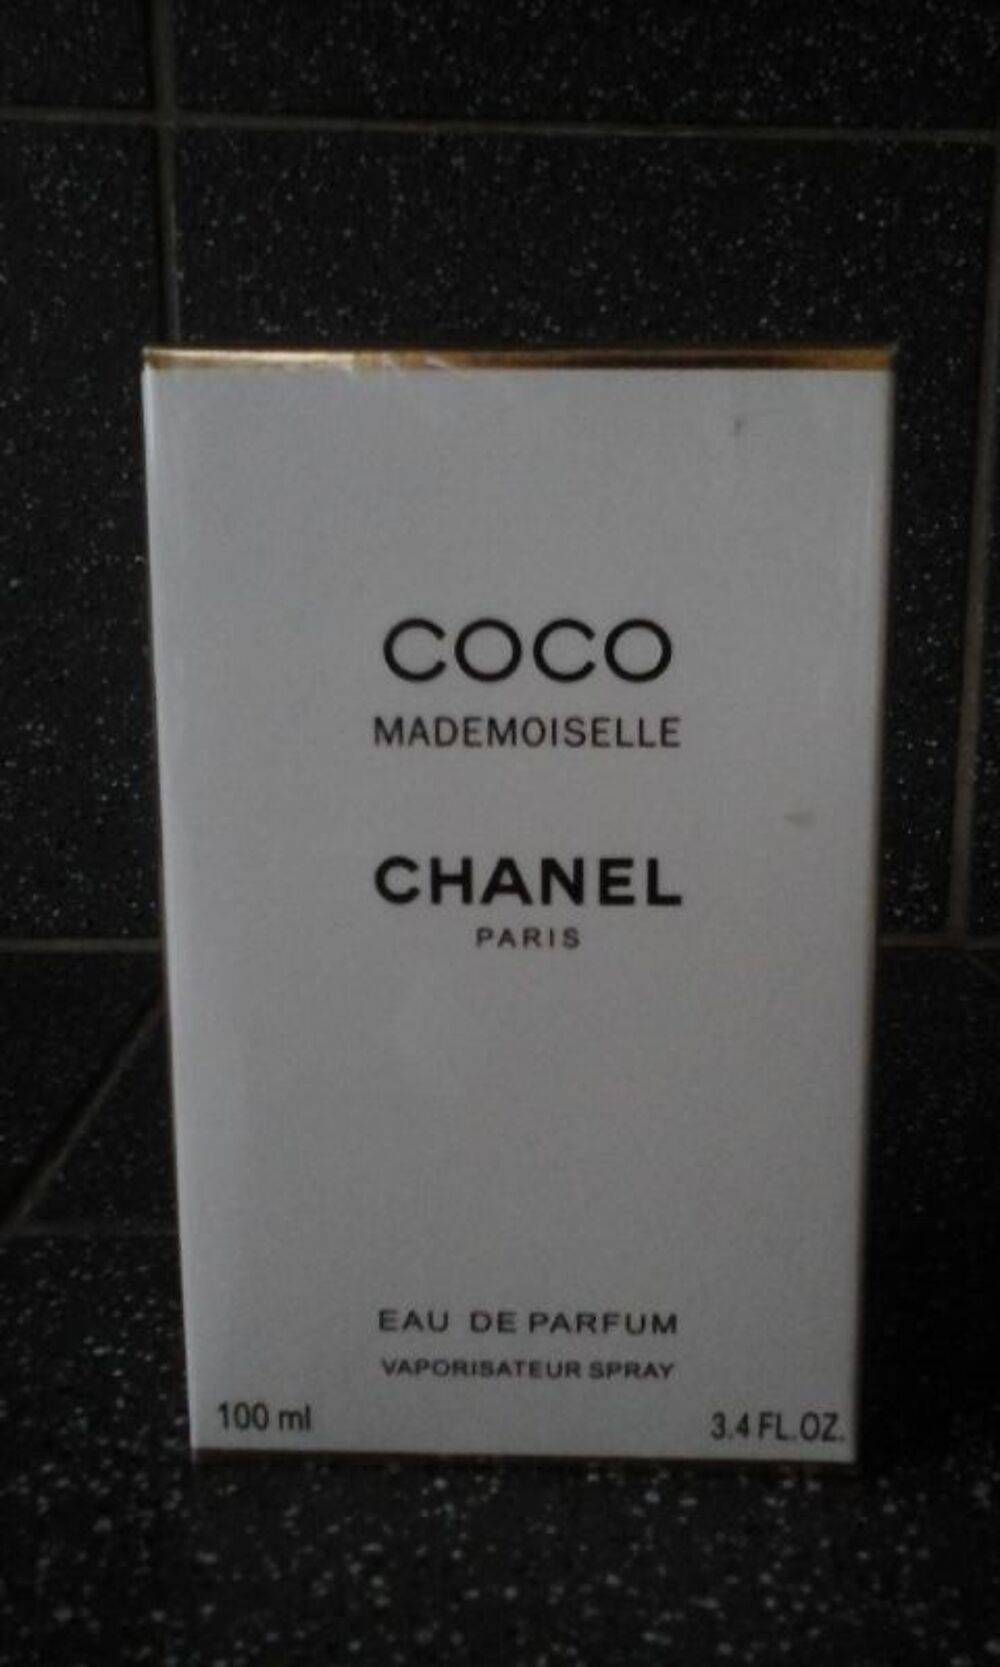 Coco Mademoiselle Chanel 